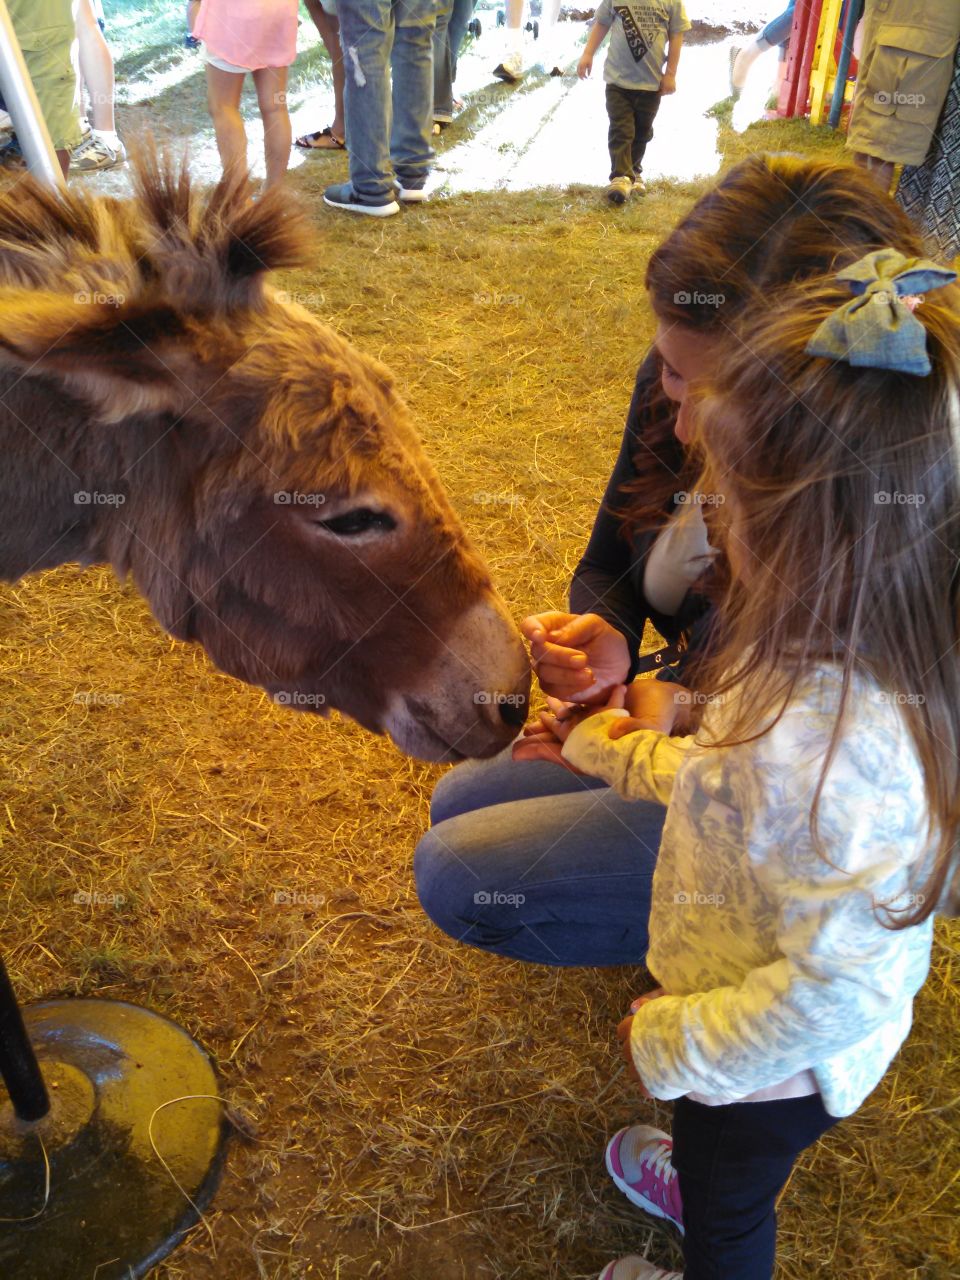 First time at the petting zoo. A mother and daughter feeding a donkey at a petting zoo